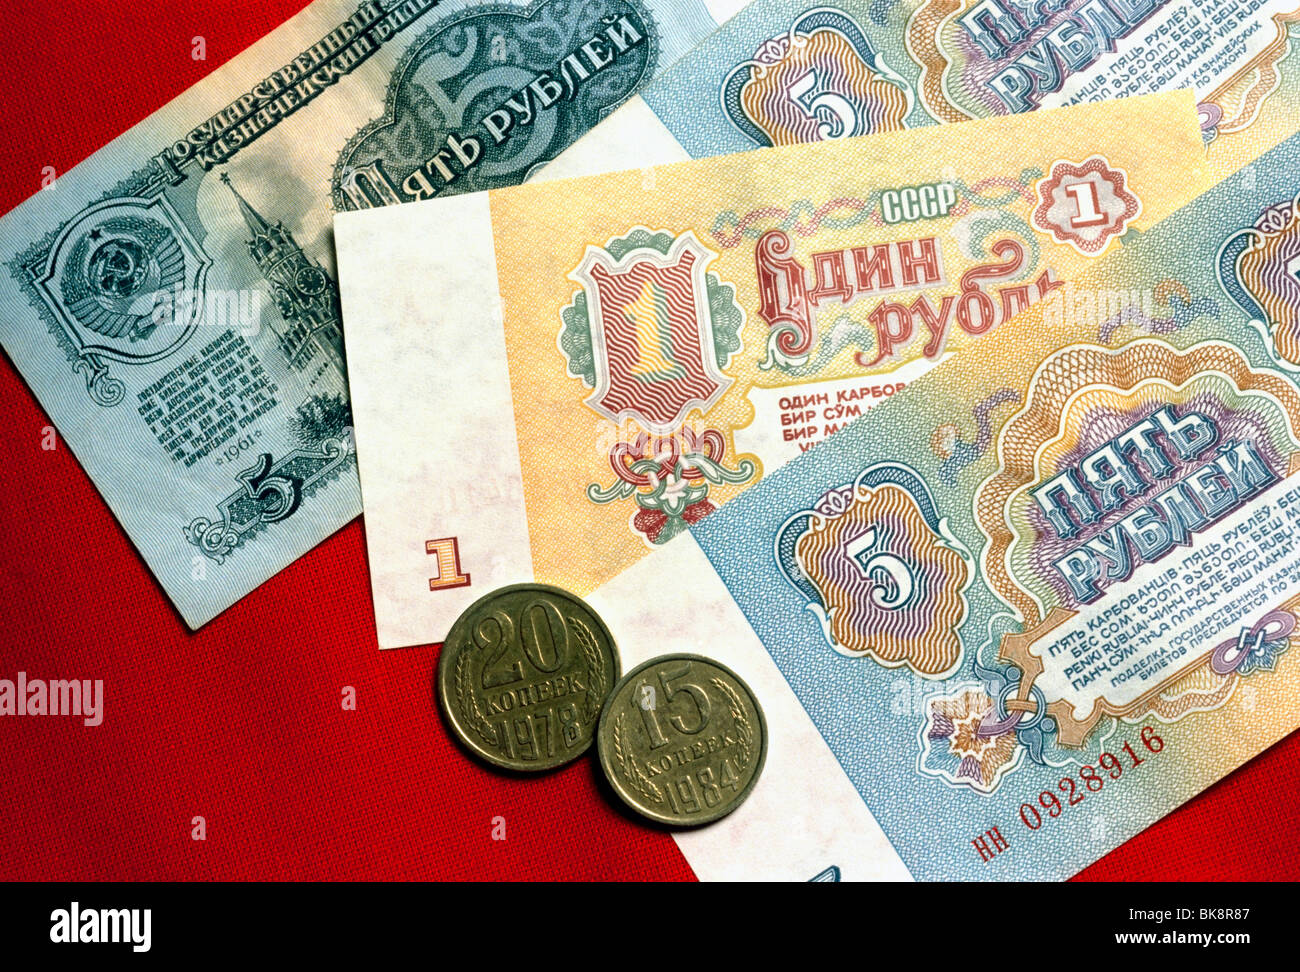 Currency and coins from the former Soviet Union (USSR) Stock Photo